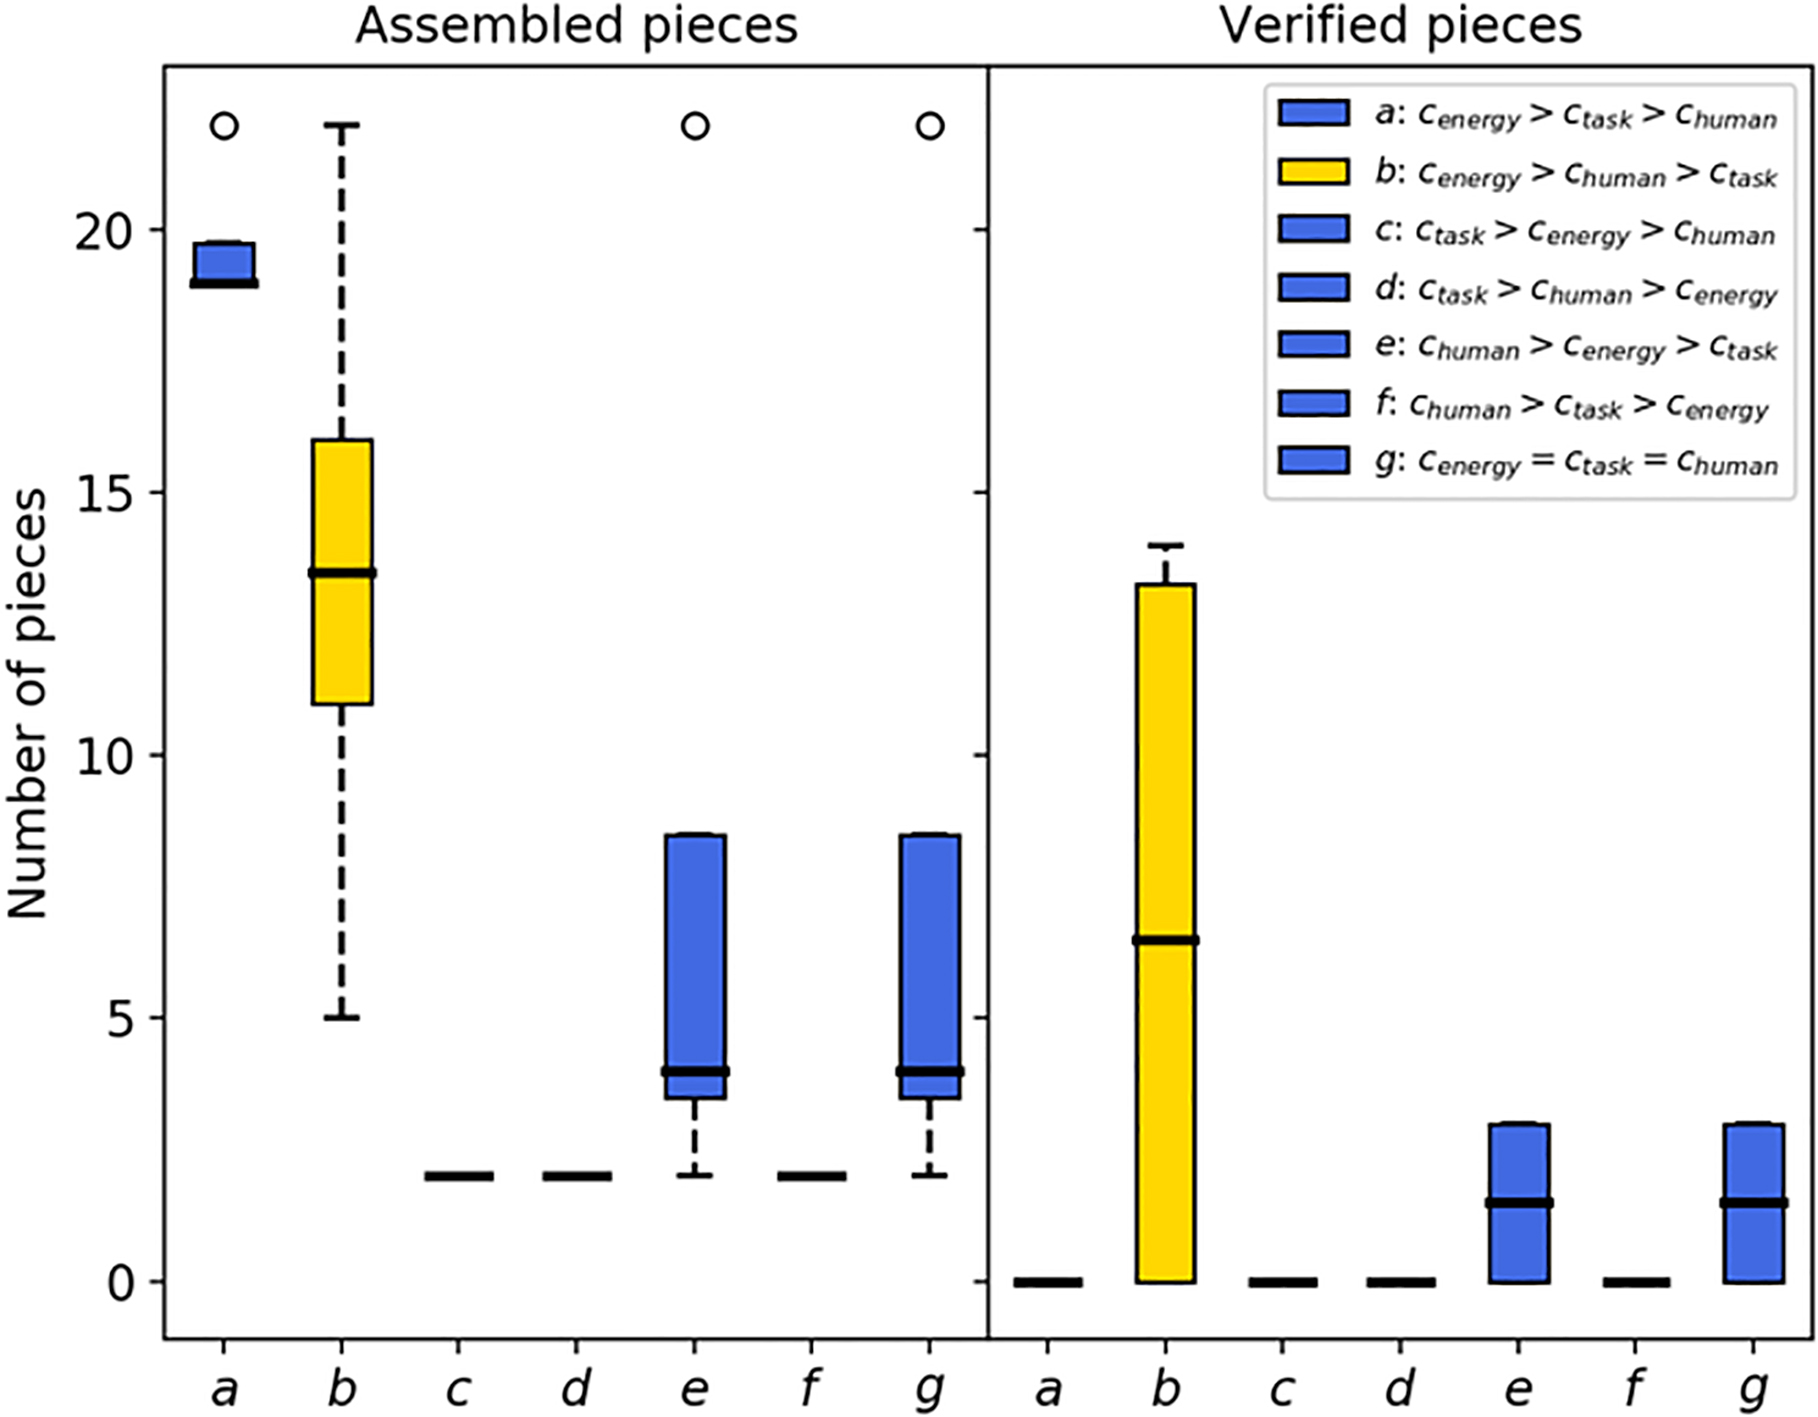 Representation of the results obtained after the execution of the experiment during 400 time steps in 4 different scenarios for 7 different combinations of the coefficients. The number of assembled parts for each of the combinations is shown on the left, while the number of verified parts for each of these cases is shown on the right.